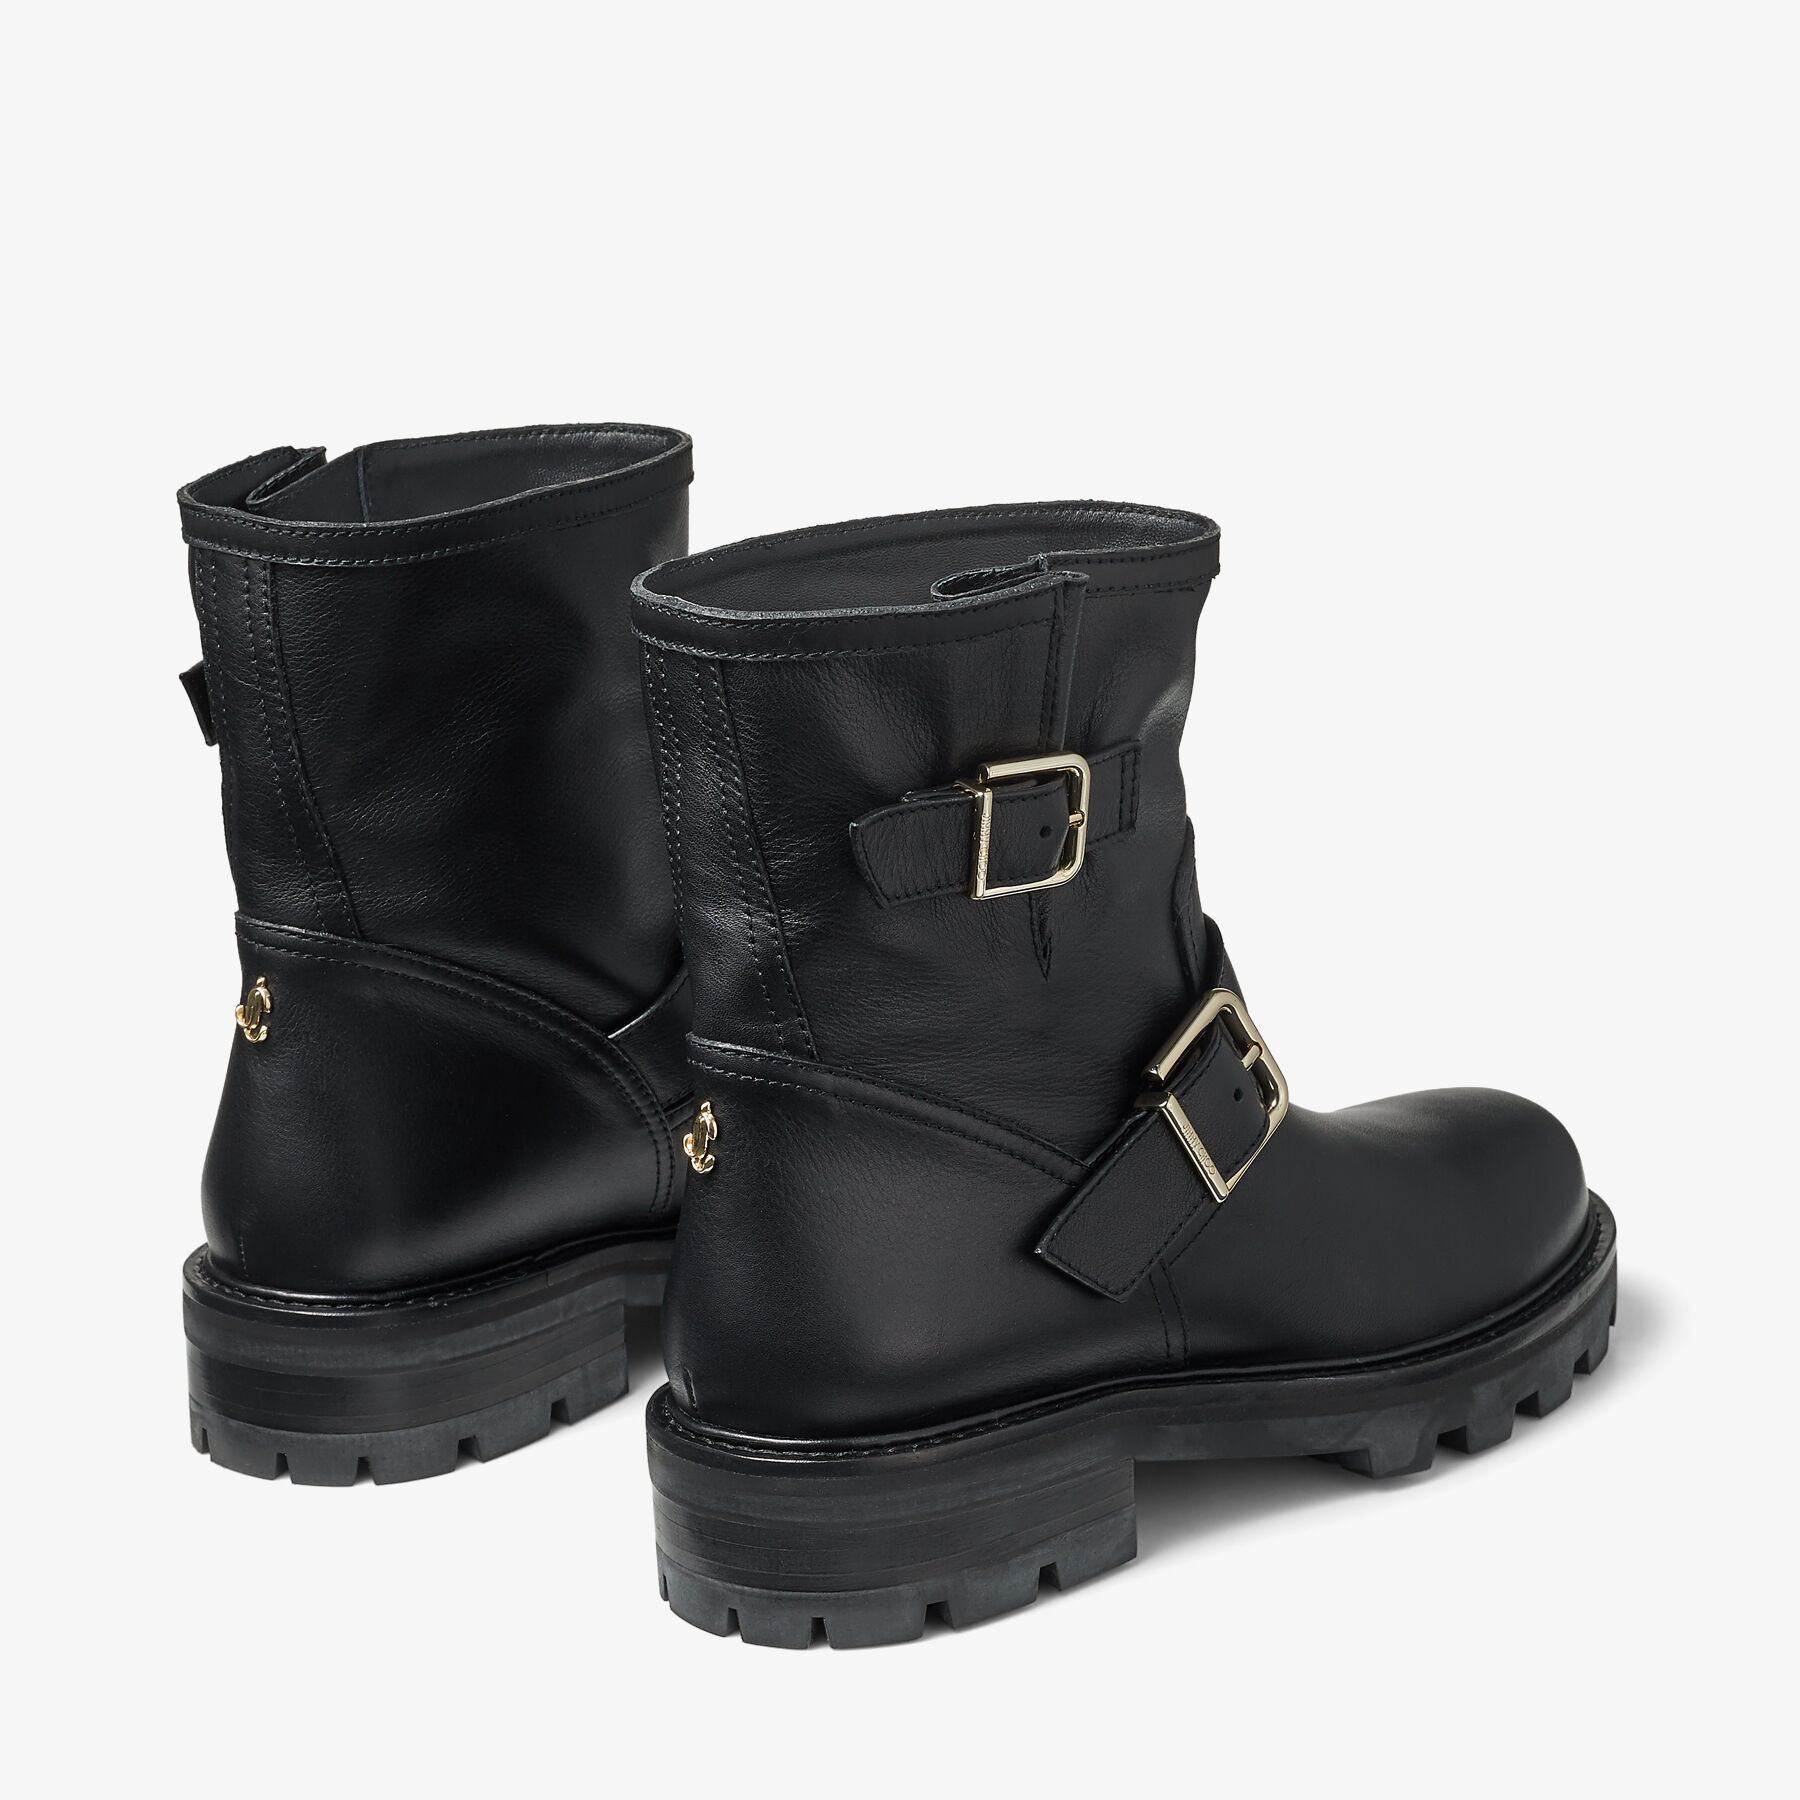 Black Smooth Leather Biker Boots with Gold Buckles | YOUTH